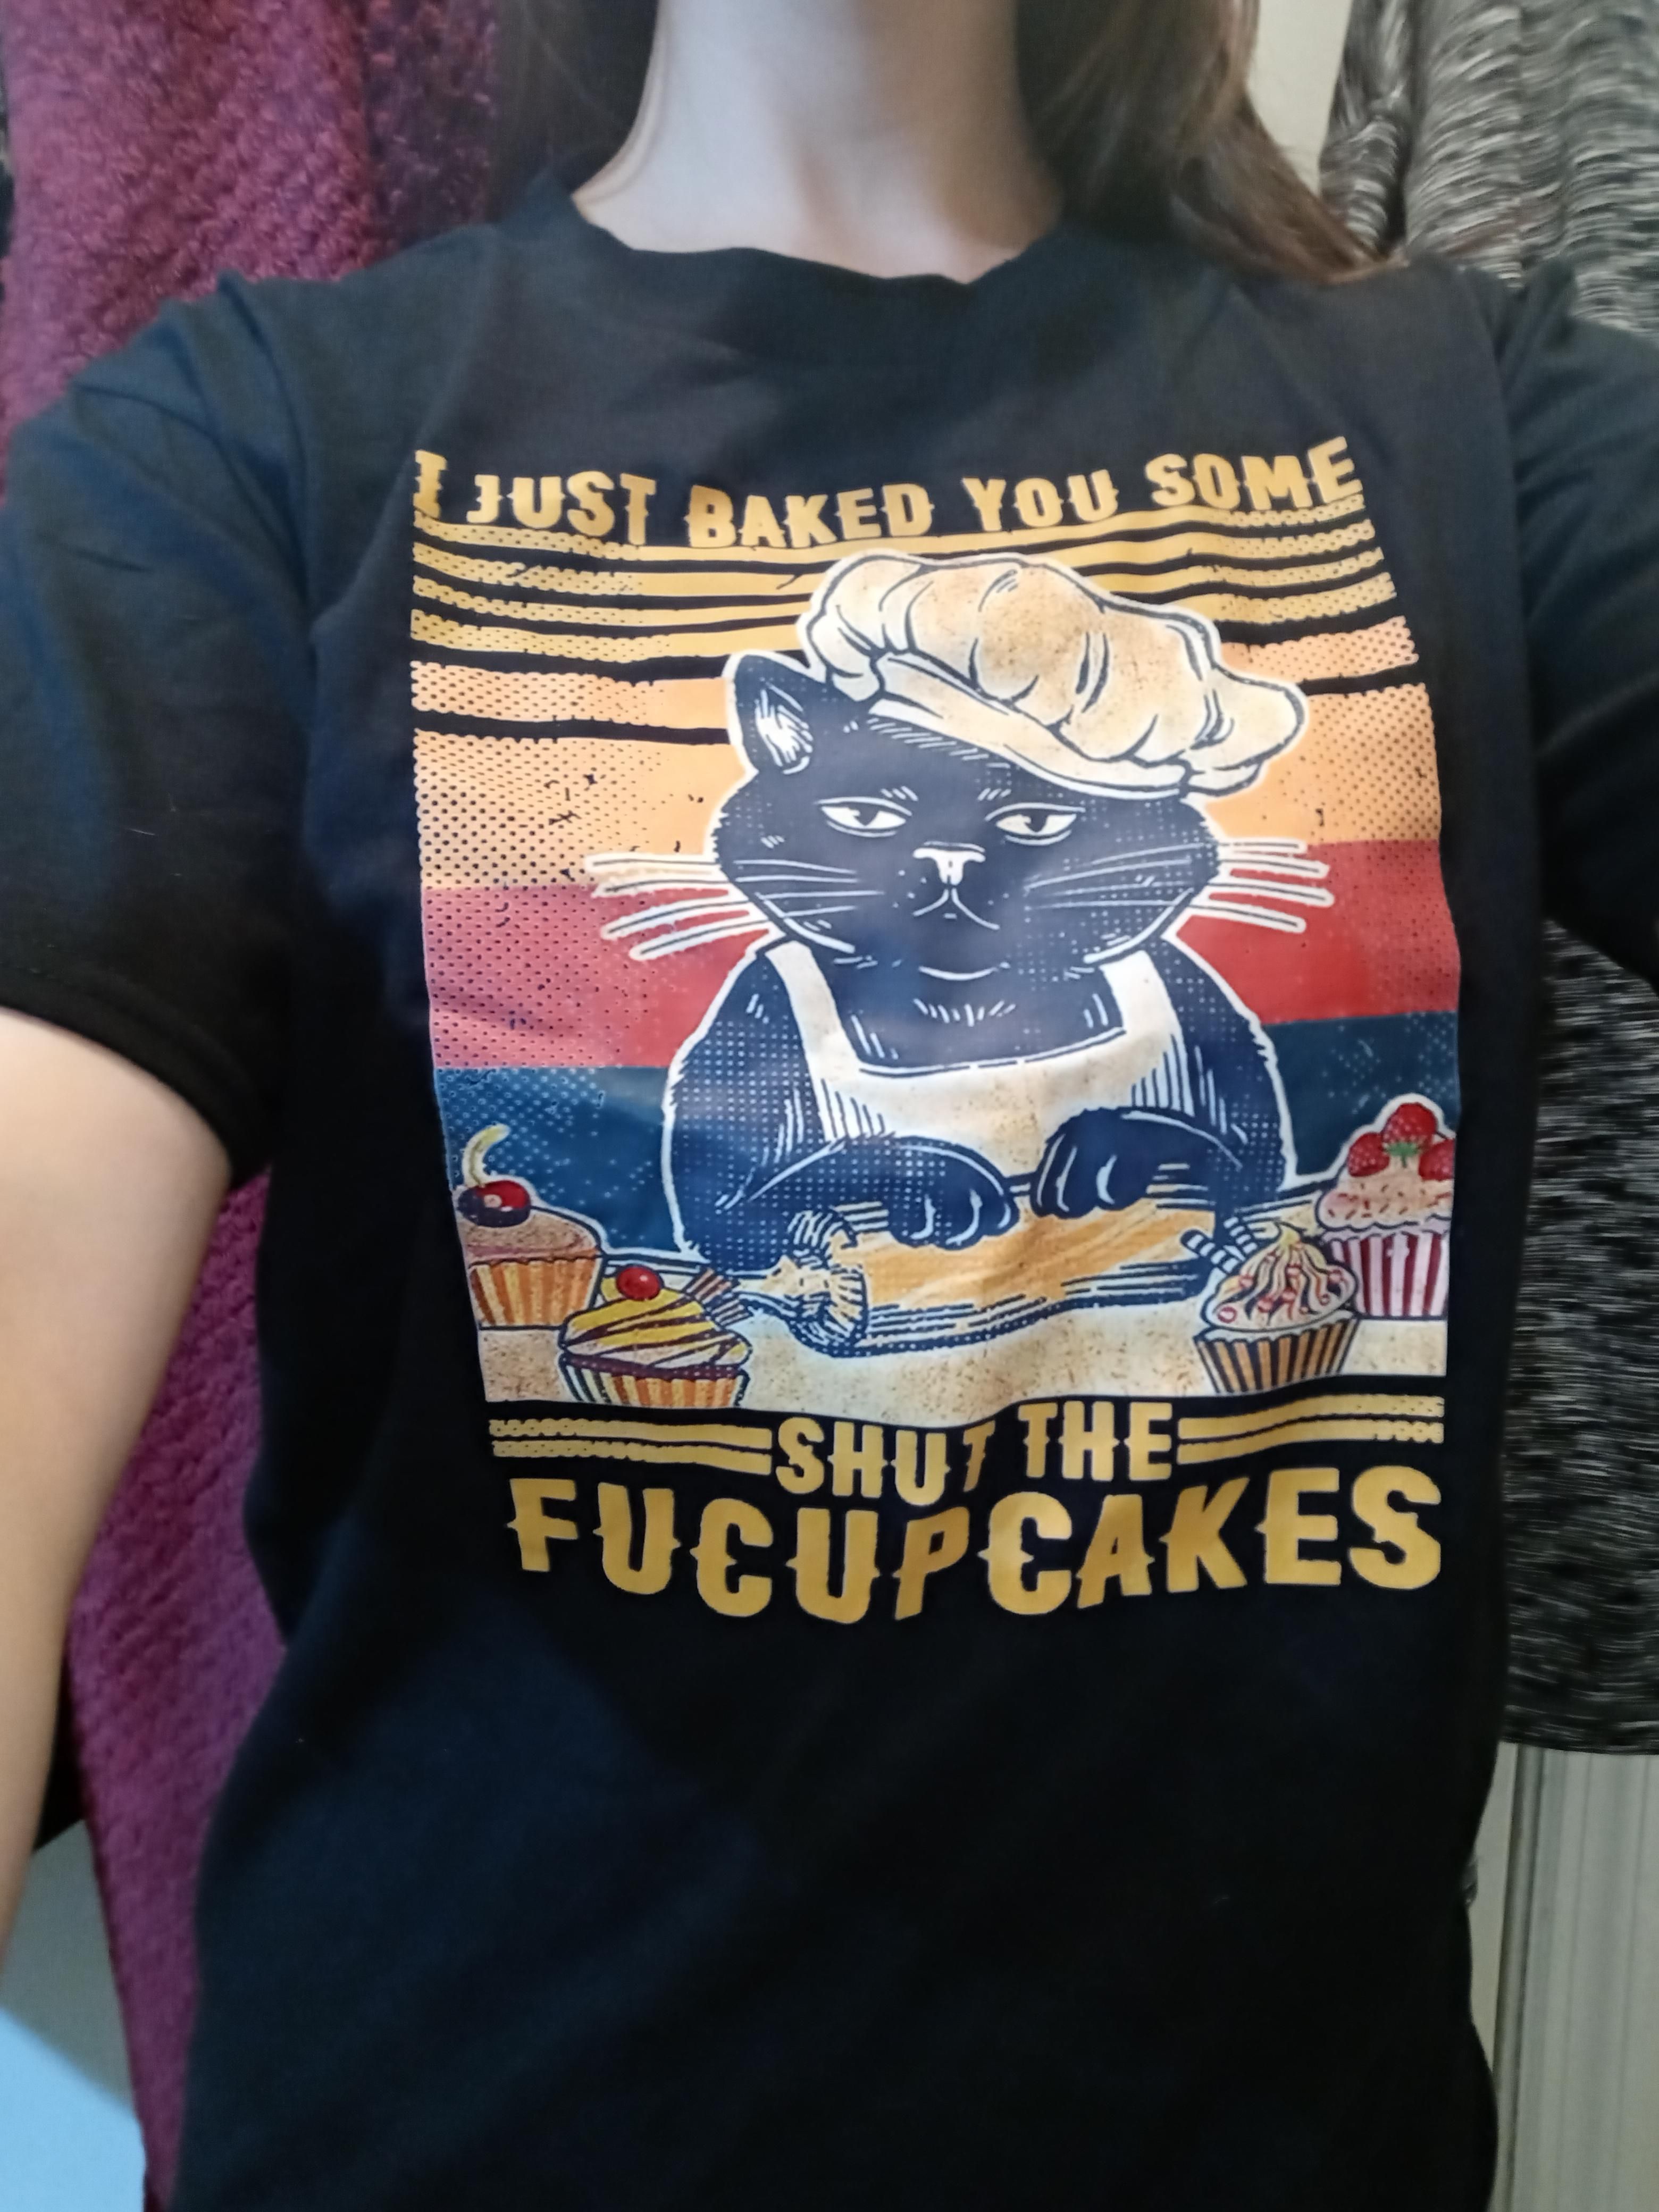 I love to bake and I have an angry streak, so my friend sent me this shirt.